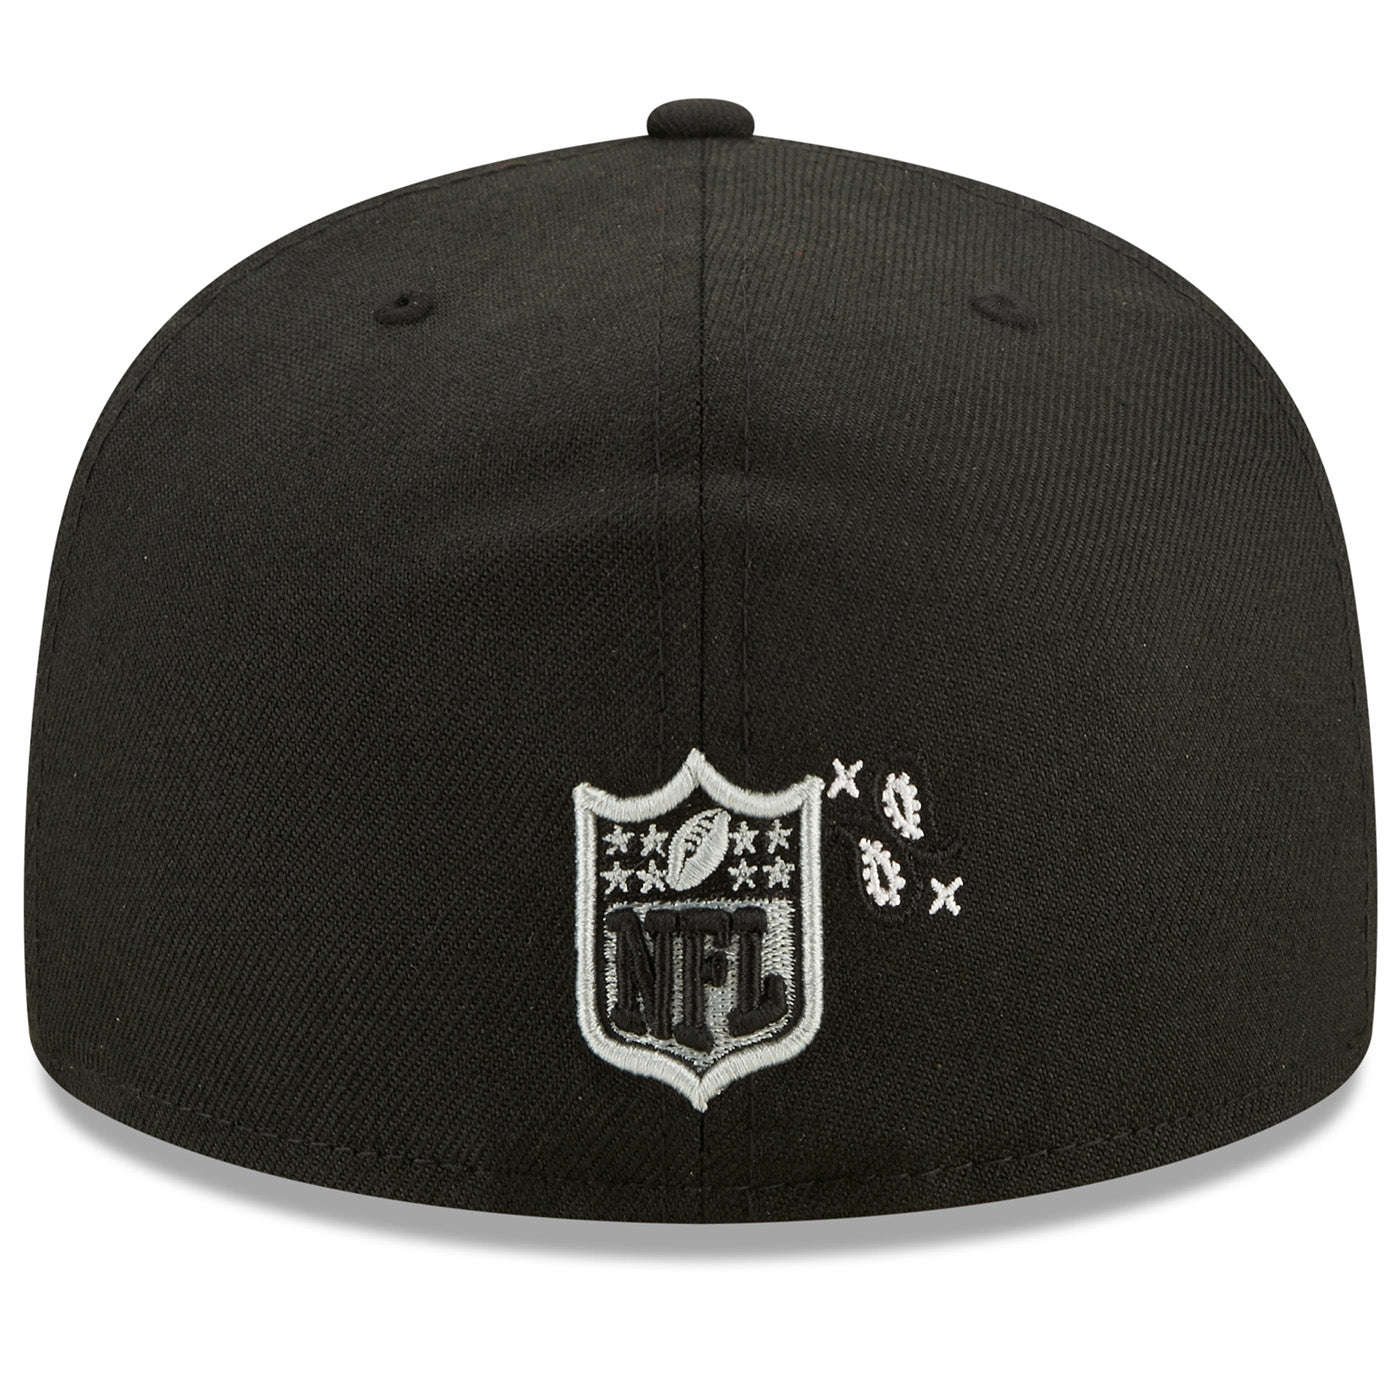 New Era Las Vegas Raiders hat NFL59Fifty fitted Black Custom Embroidery  size73/4